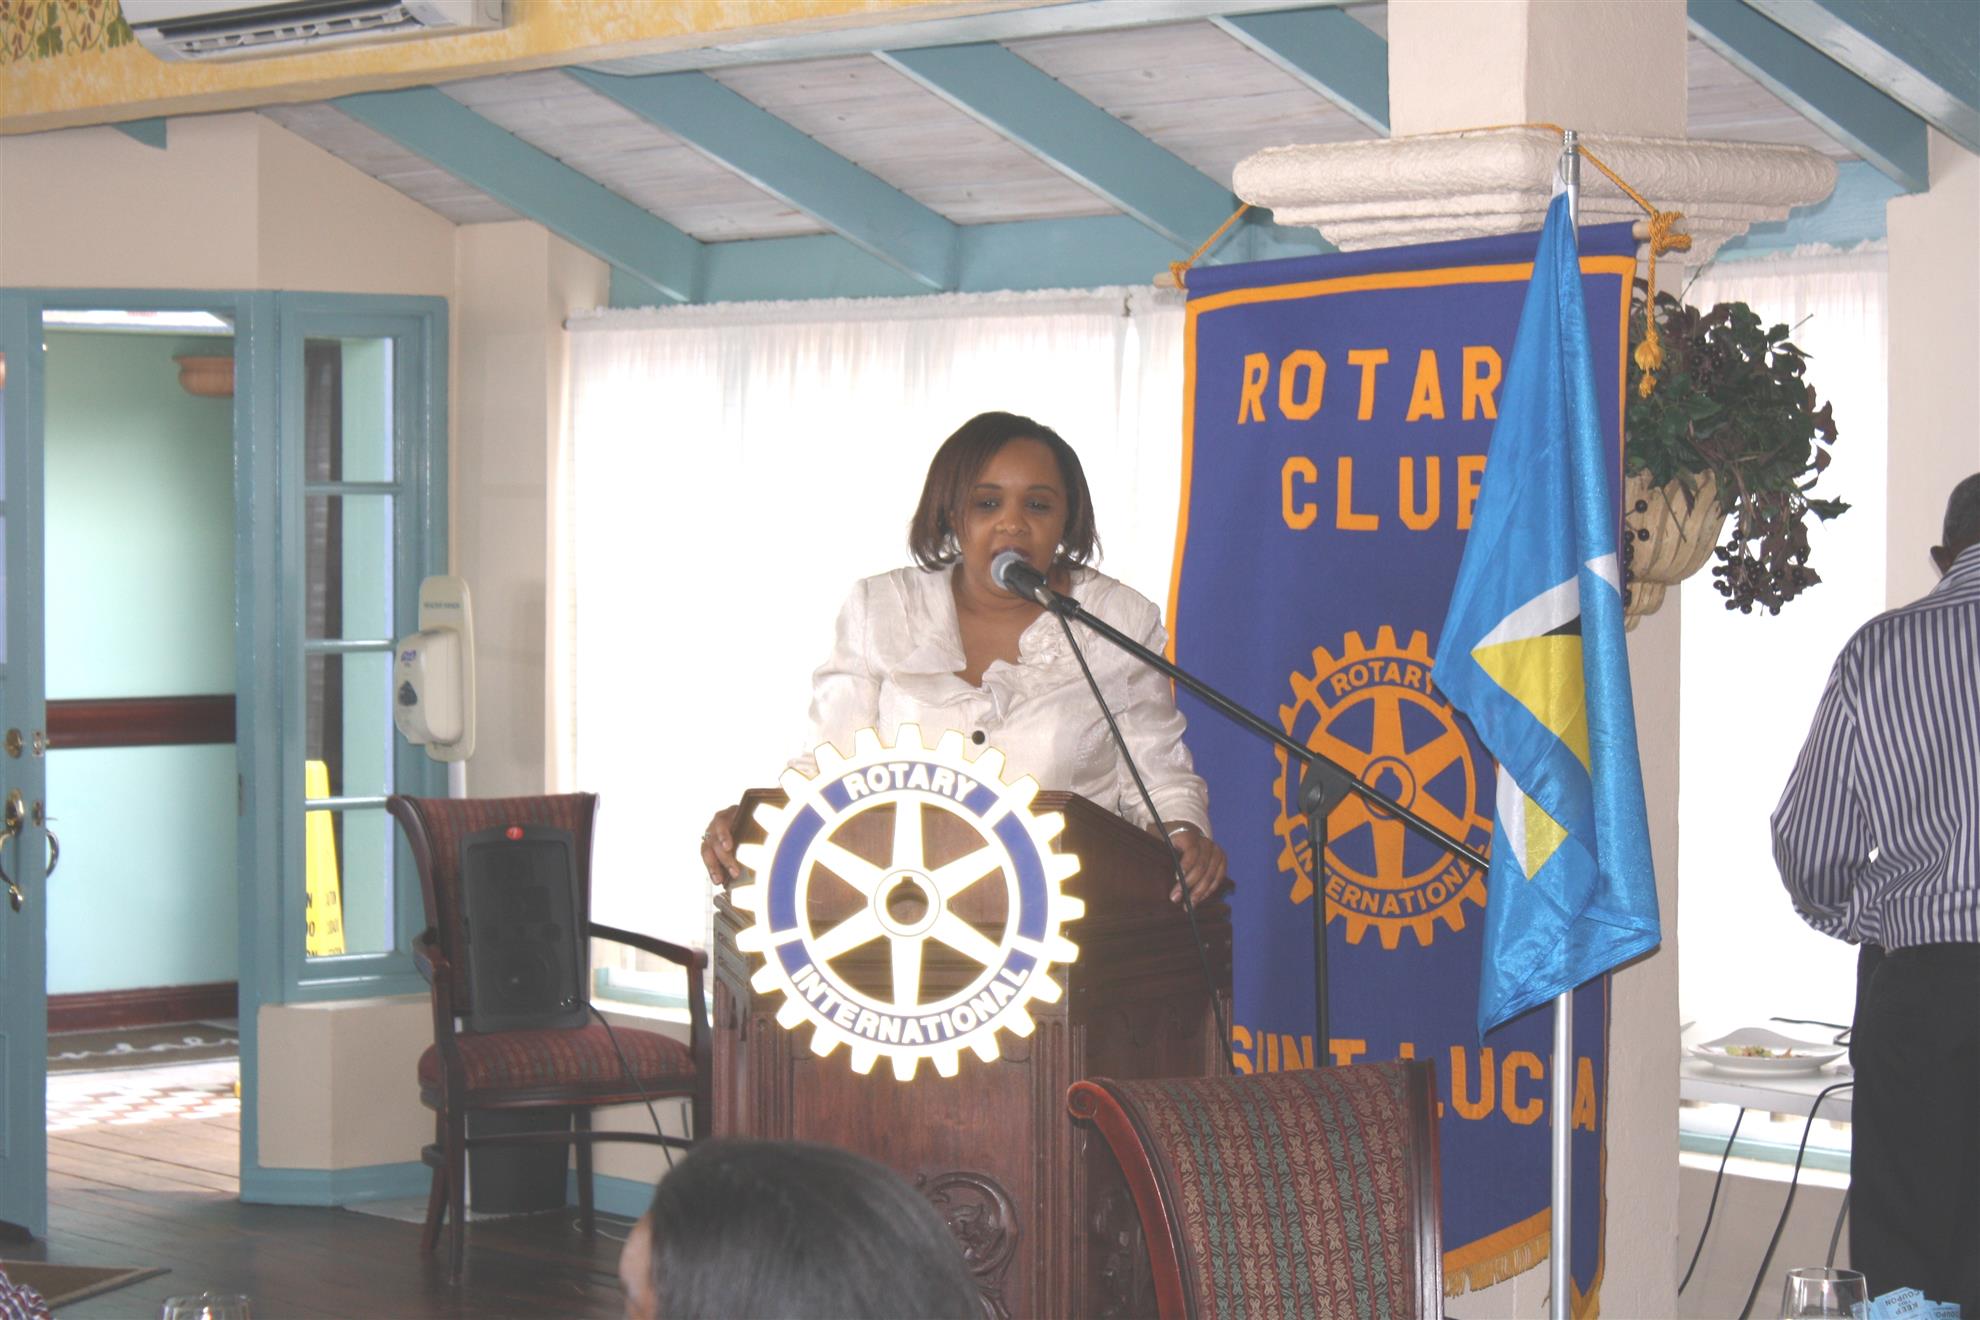 The Rotary Club Of St Lucia December 1 2017 Bulletin Dec 01 2017